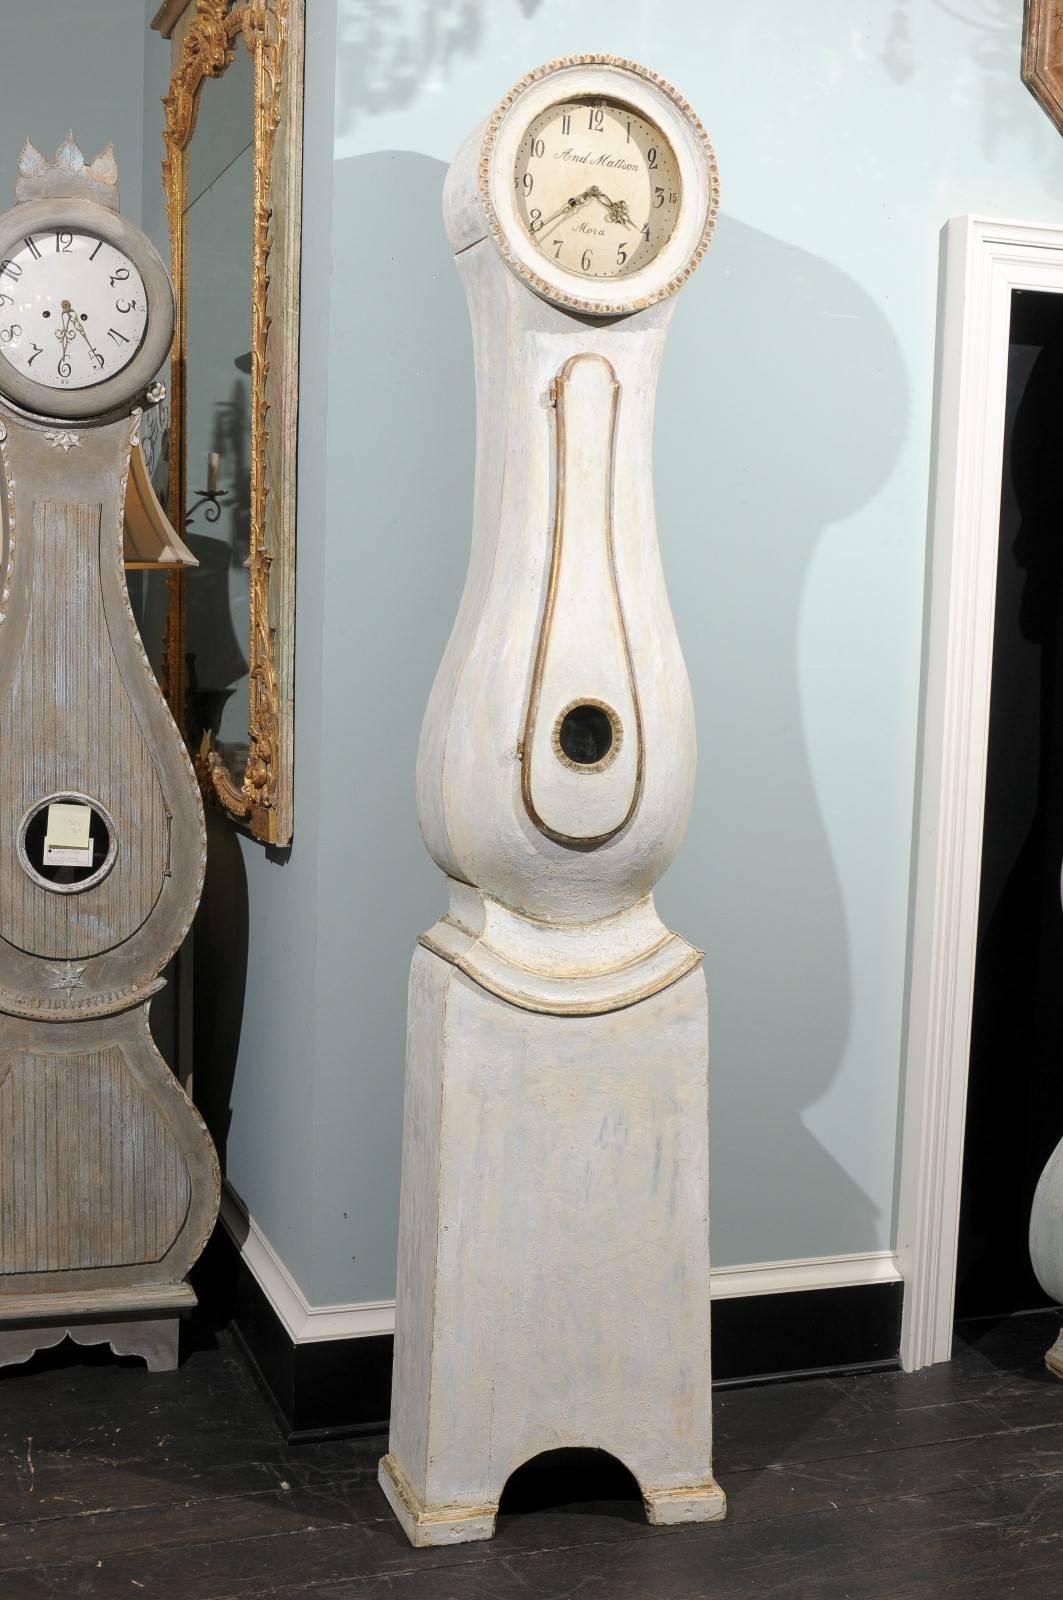 Hand-Painted Swedish 19th Century Wooden Clock with White Color and Subtle Blue Undertone